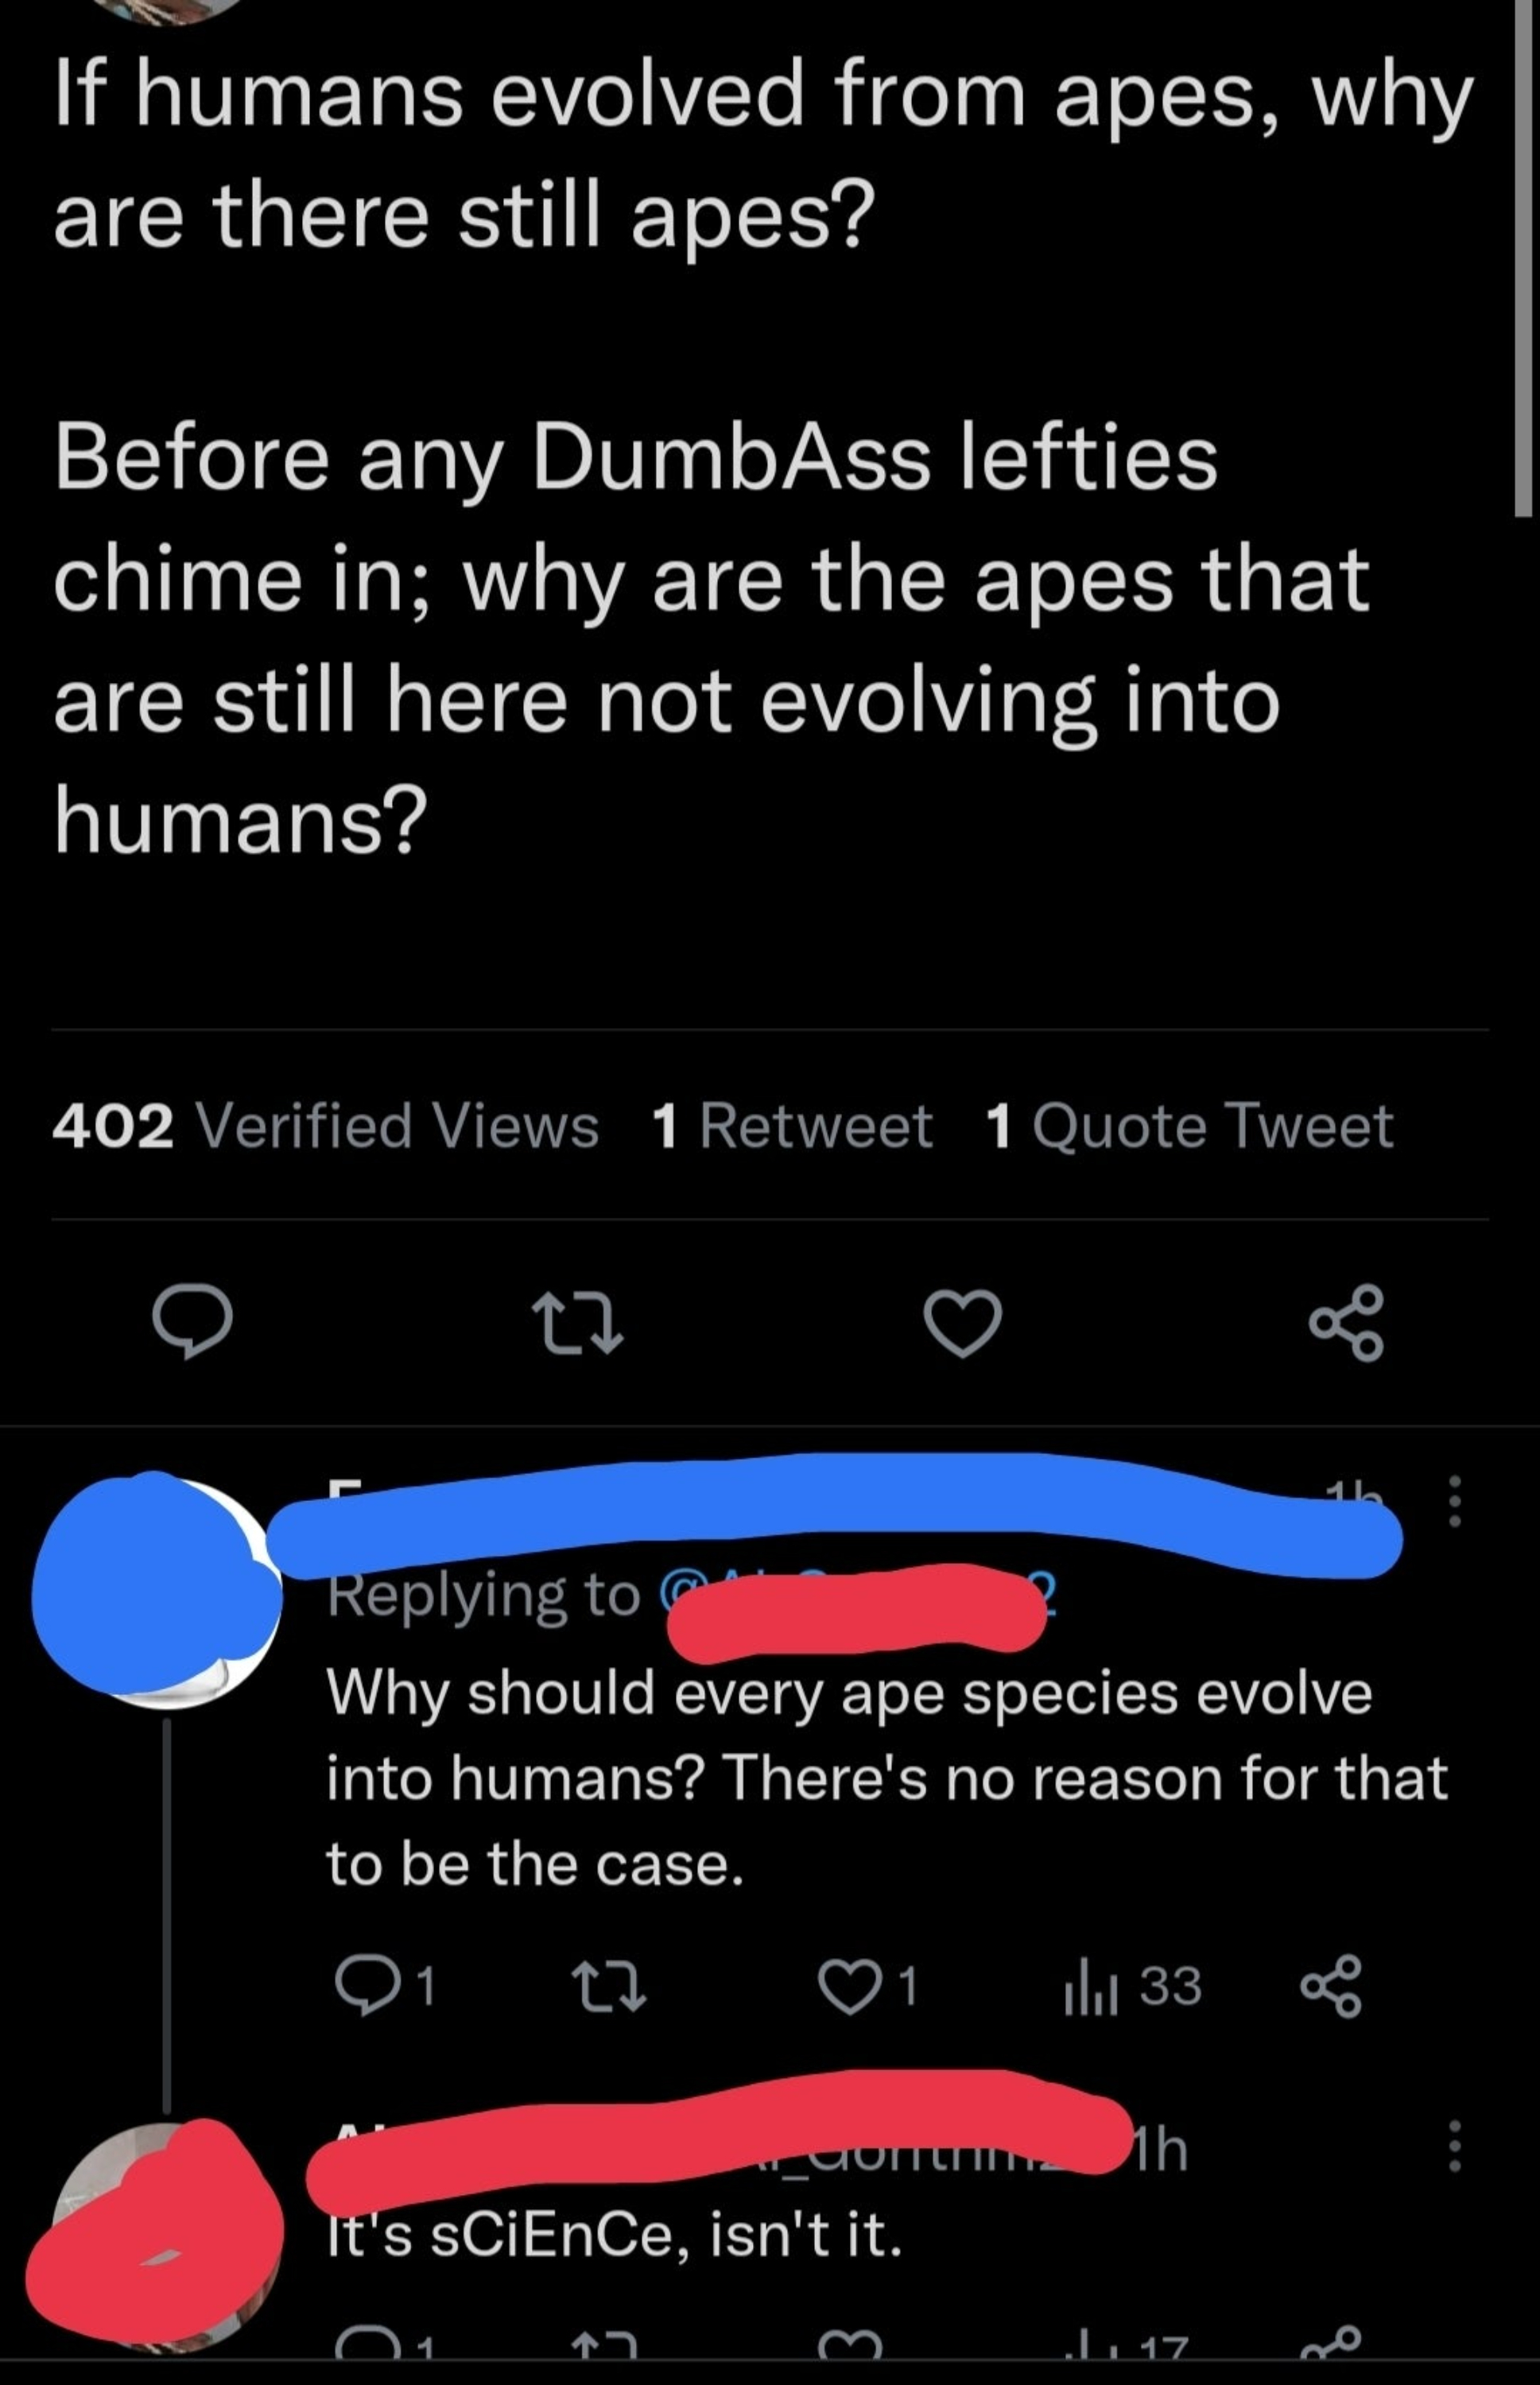 &quot;why are the apes that are still here not evolving into humans?&quot; &quot;Why should every ape species evolve into humans? There&#x27;s no reason for that to be the case&quot;